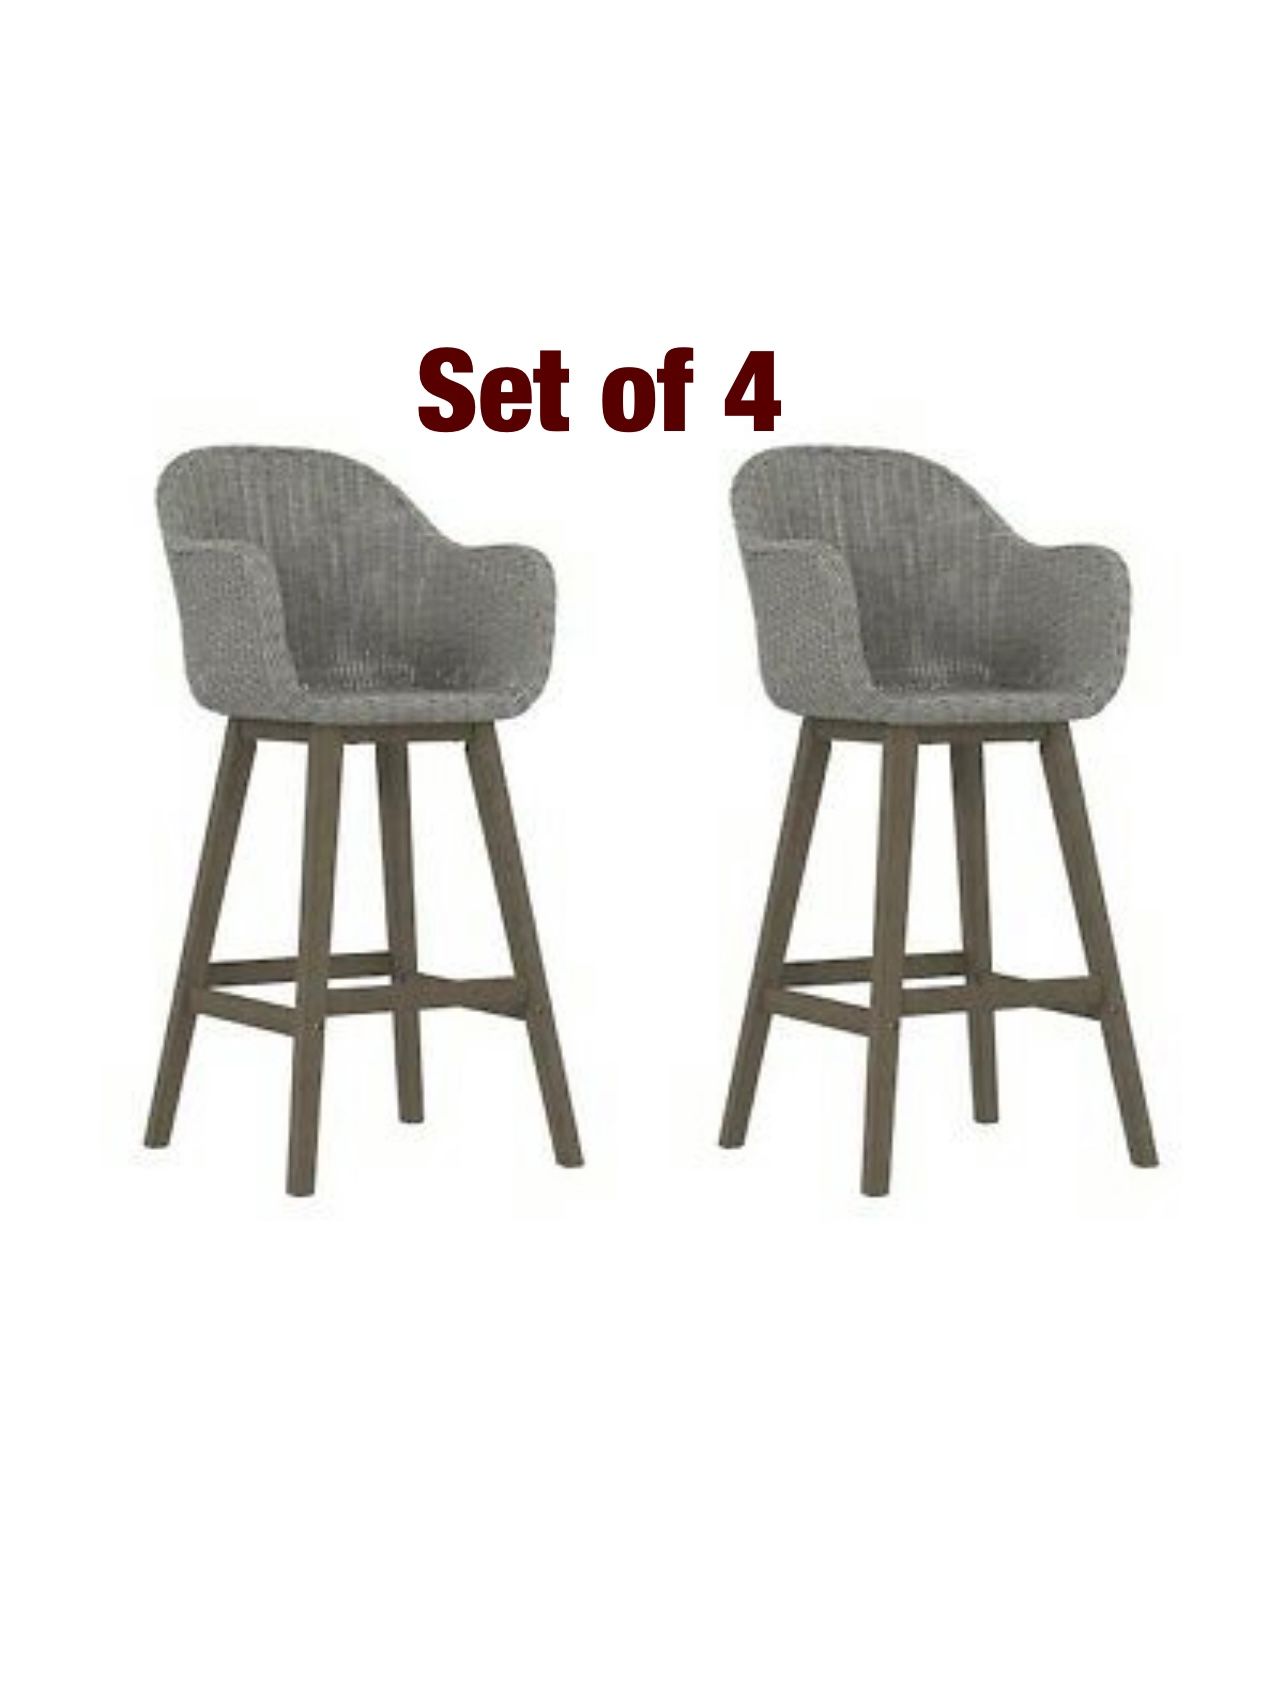  Allen and Roth set Of 4 Benton Ridge Wood Frame Woven Dining Chair Set / Patio Barstools